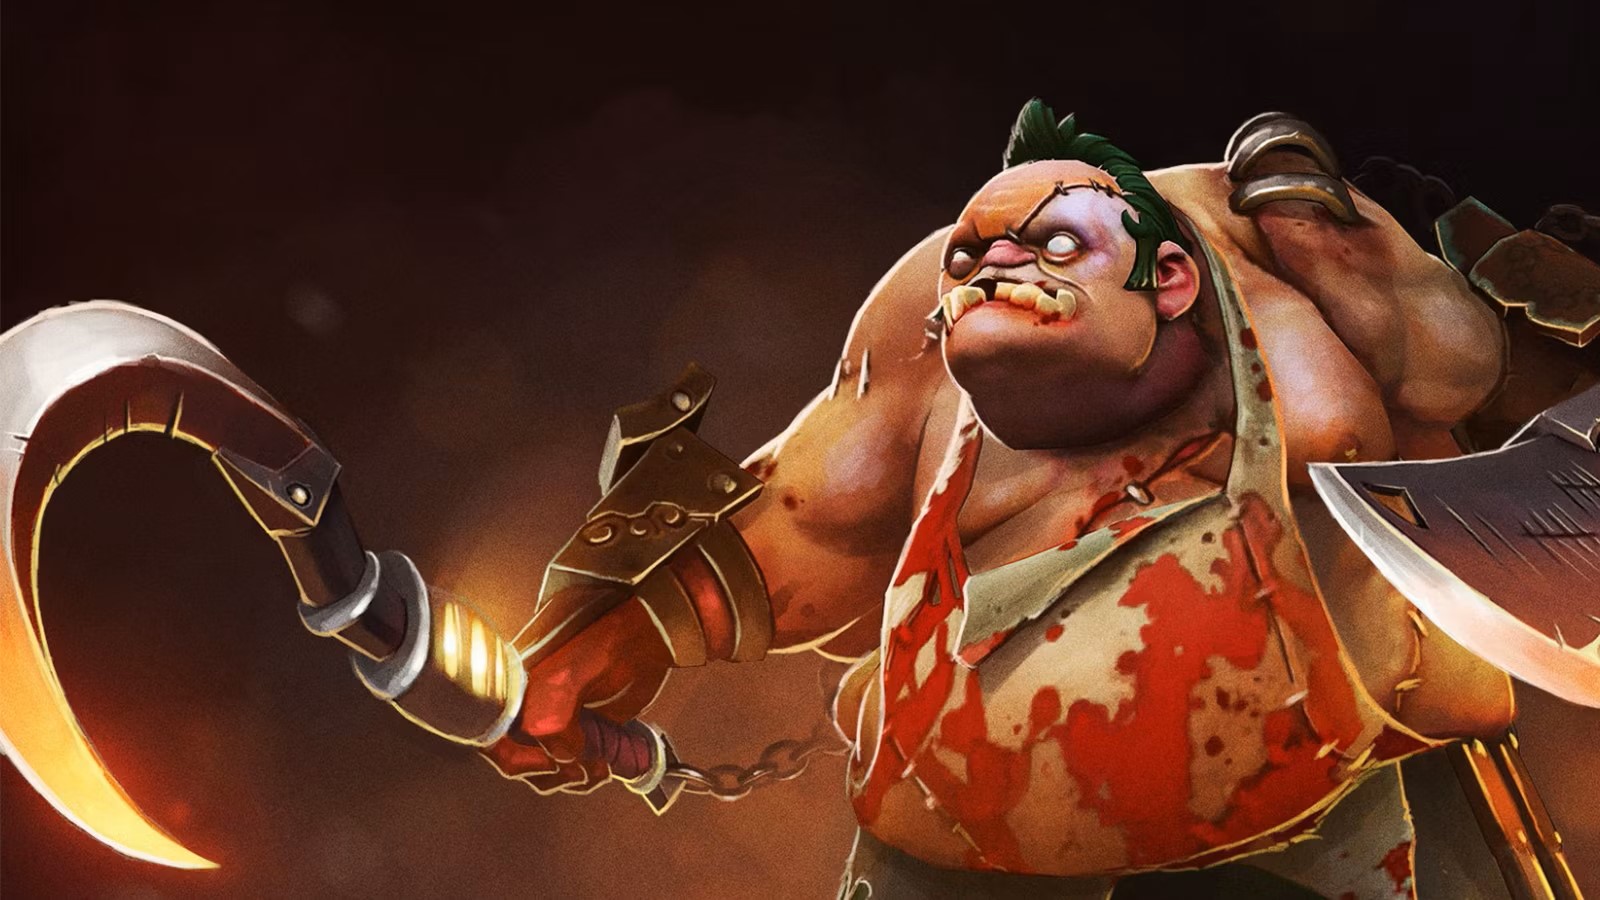 Dota 2's Pudge becomes the MOBA's first character to be played in over a billion matches